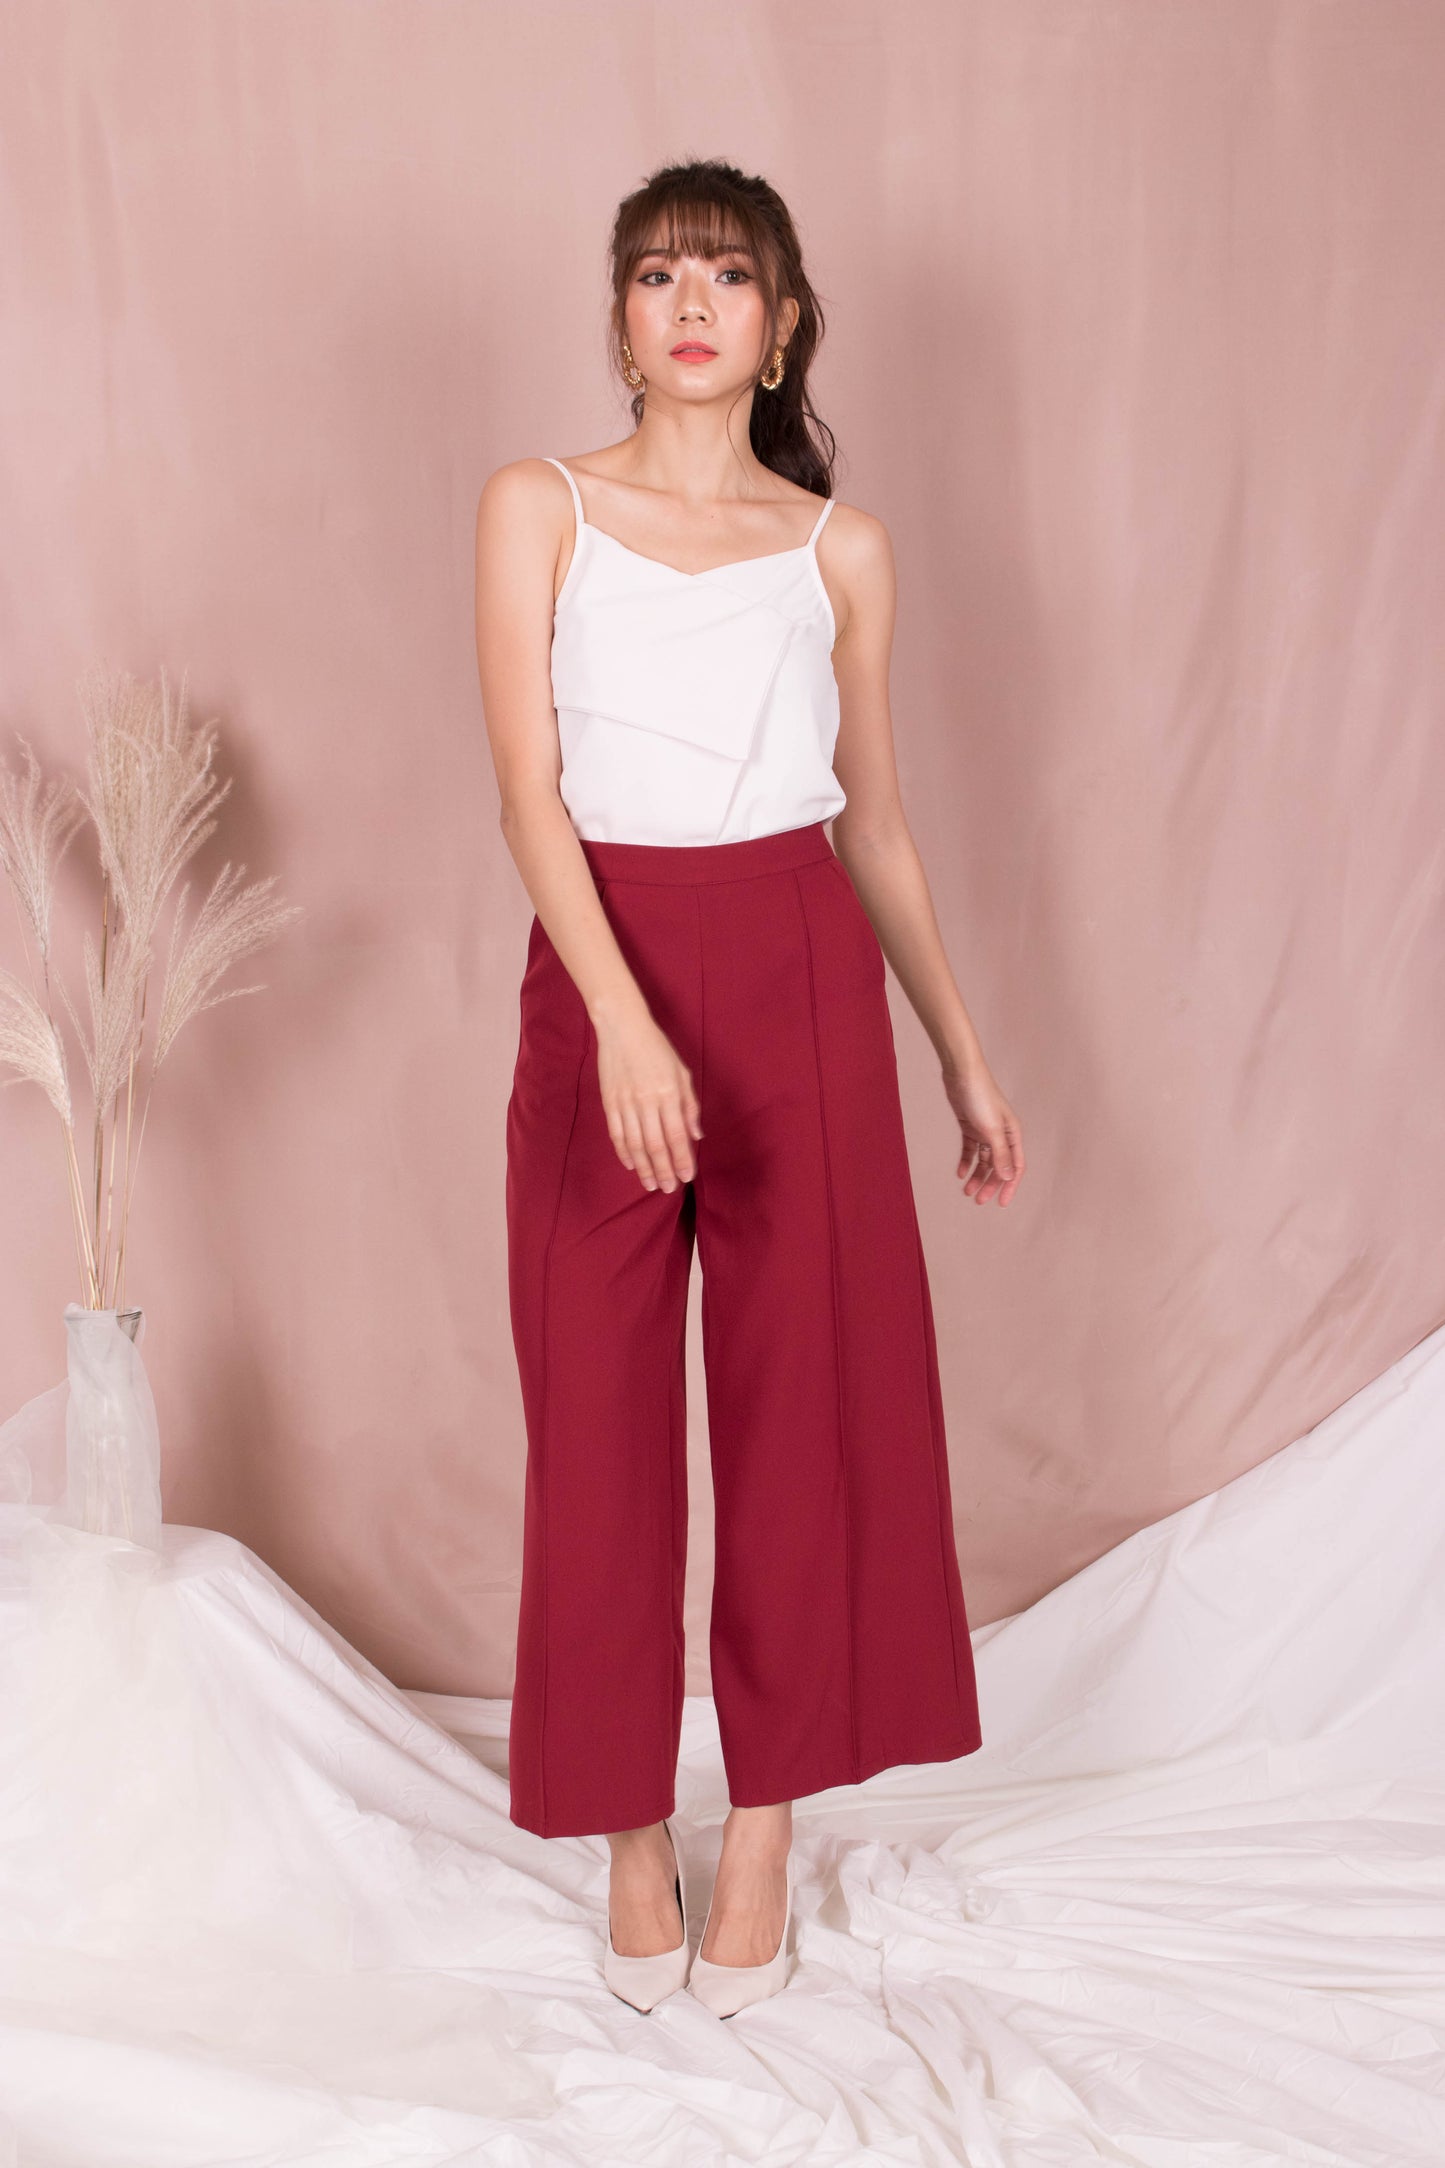 *PREMIUM* - Teslia Pants in Wine Red - Self Manufactured by LBRLABEL